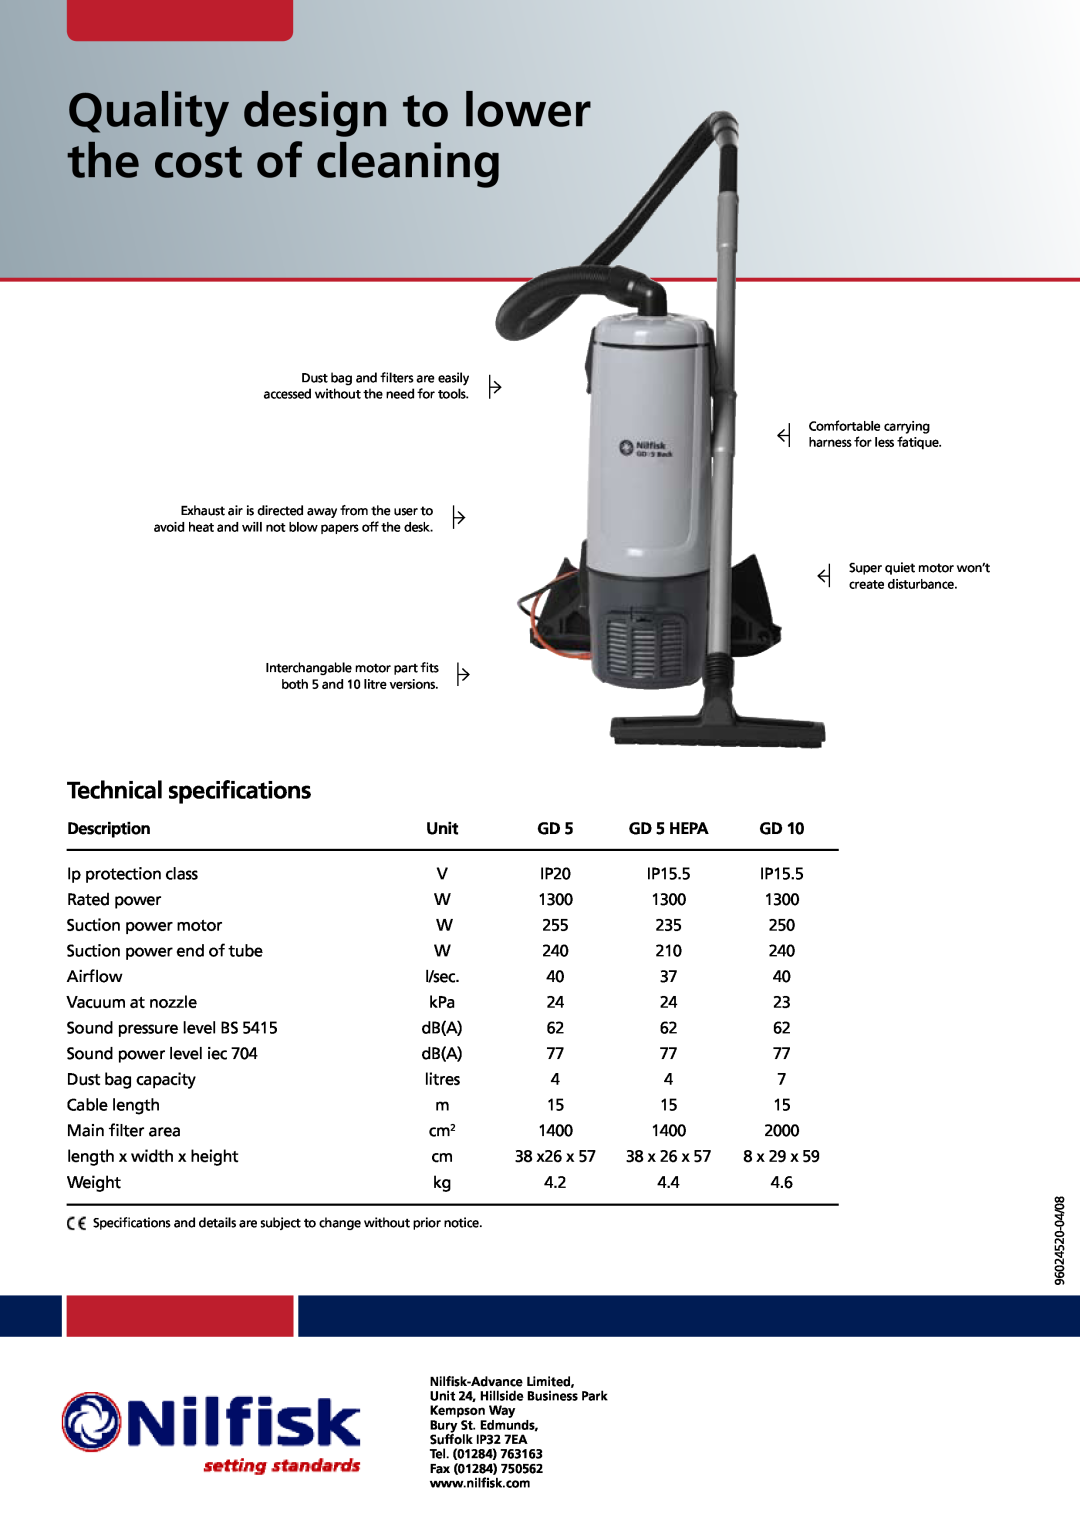 Nilfisk-ALTO GD 5/10 technical specifications Quality design to lower the cost of cleaning, Technical specifications, Unit 